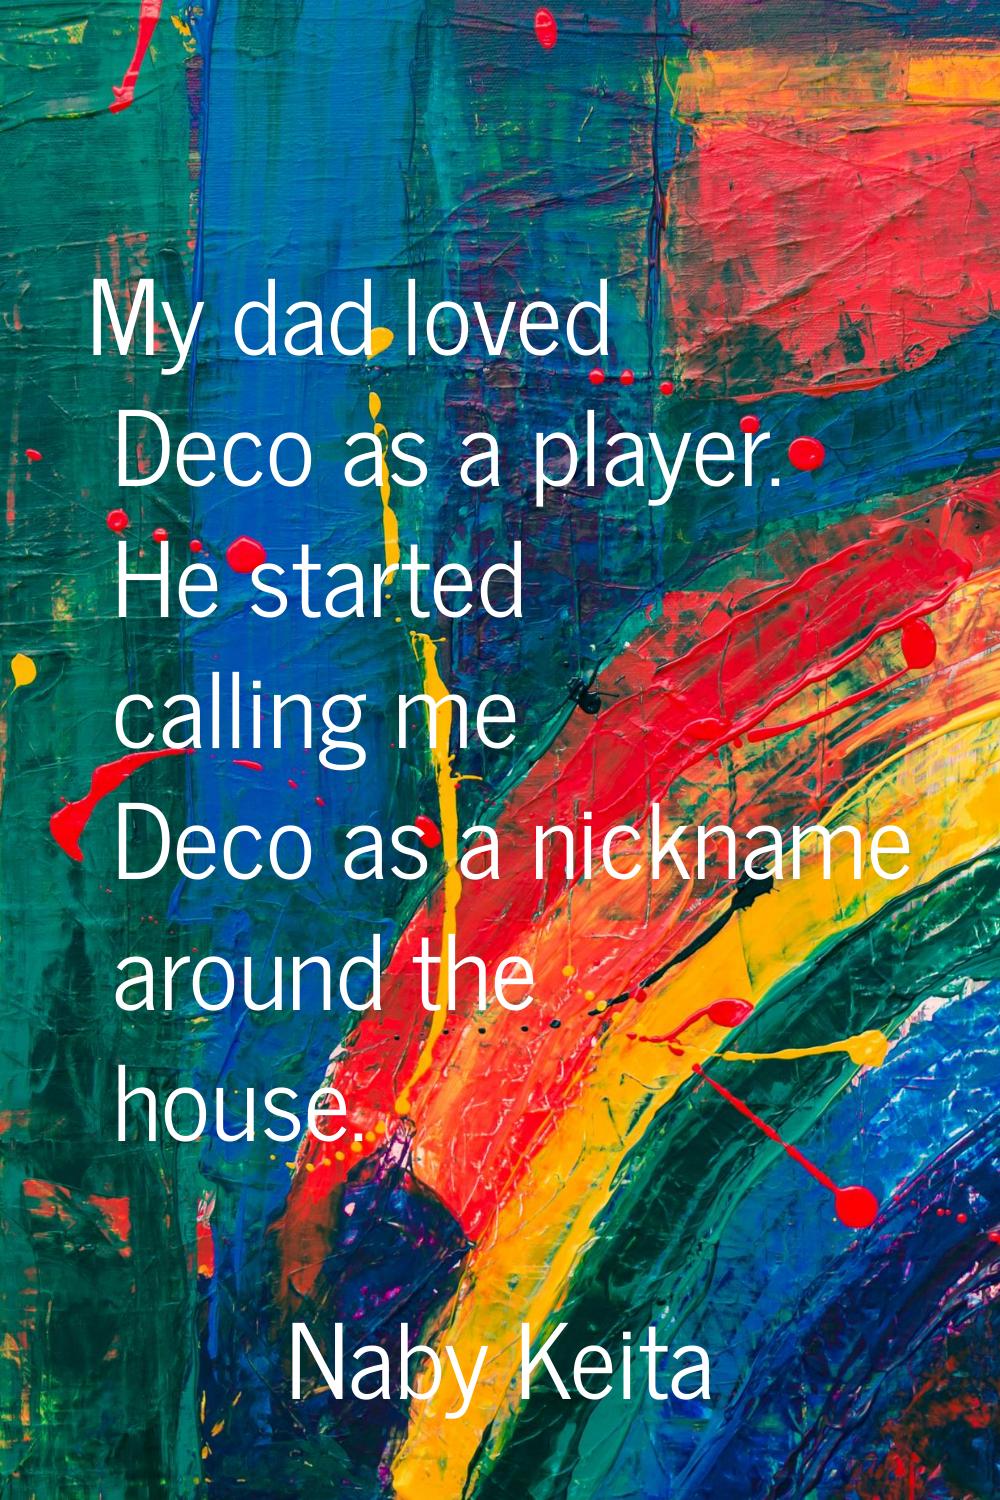 My dad loved Deco as a player. He started calling me Deco as a nickname around the house.